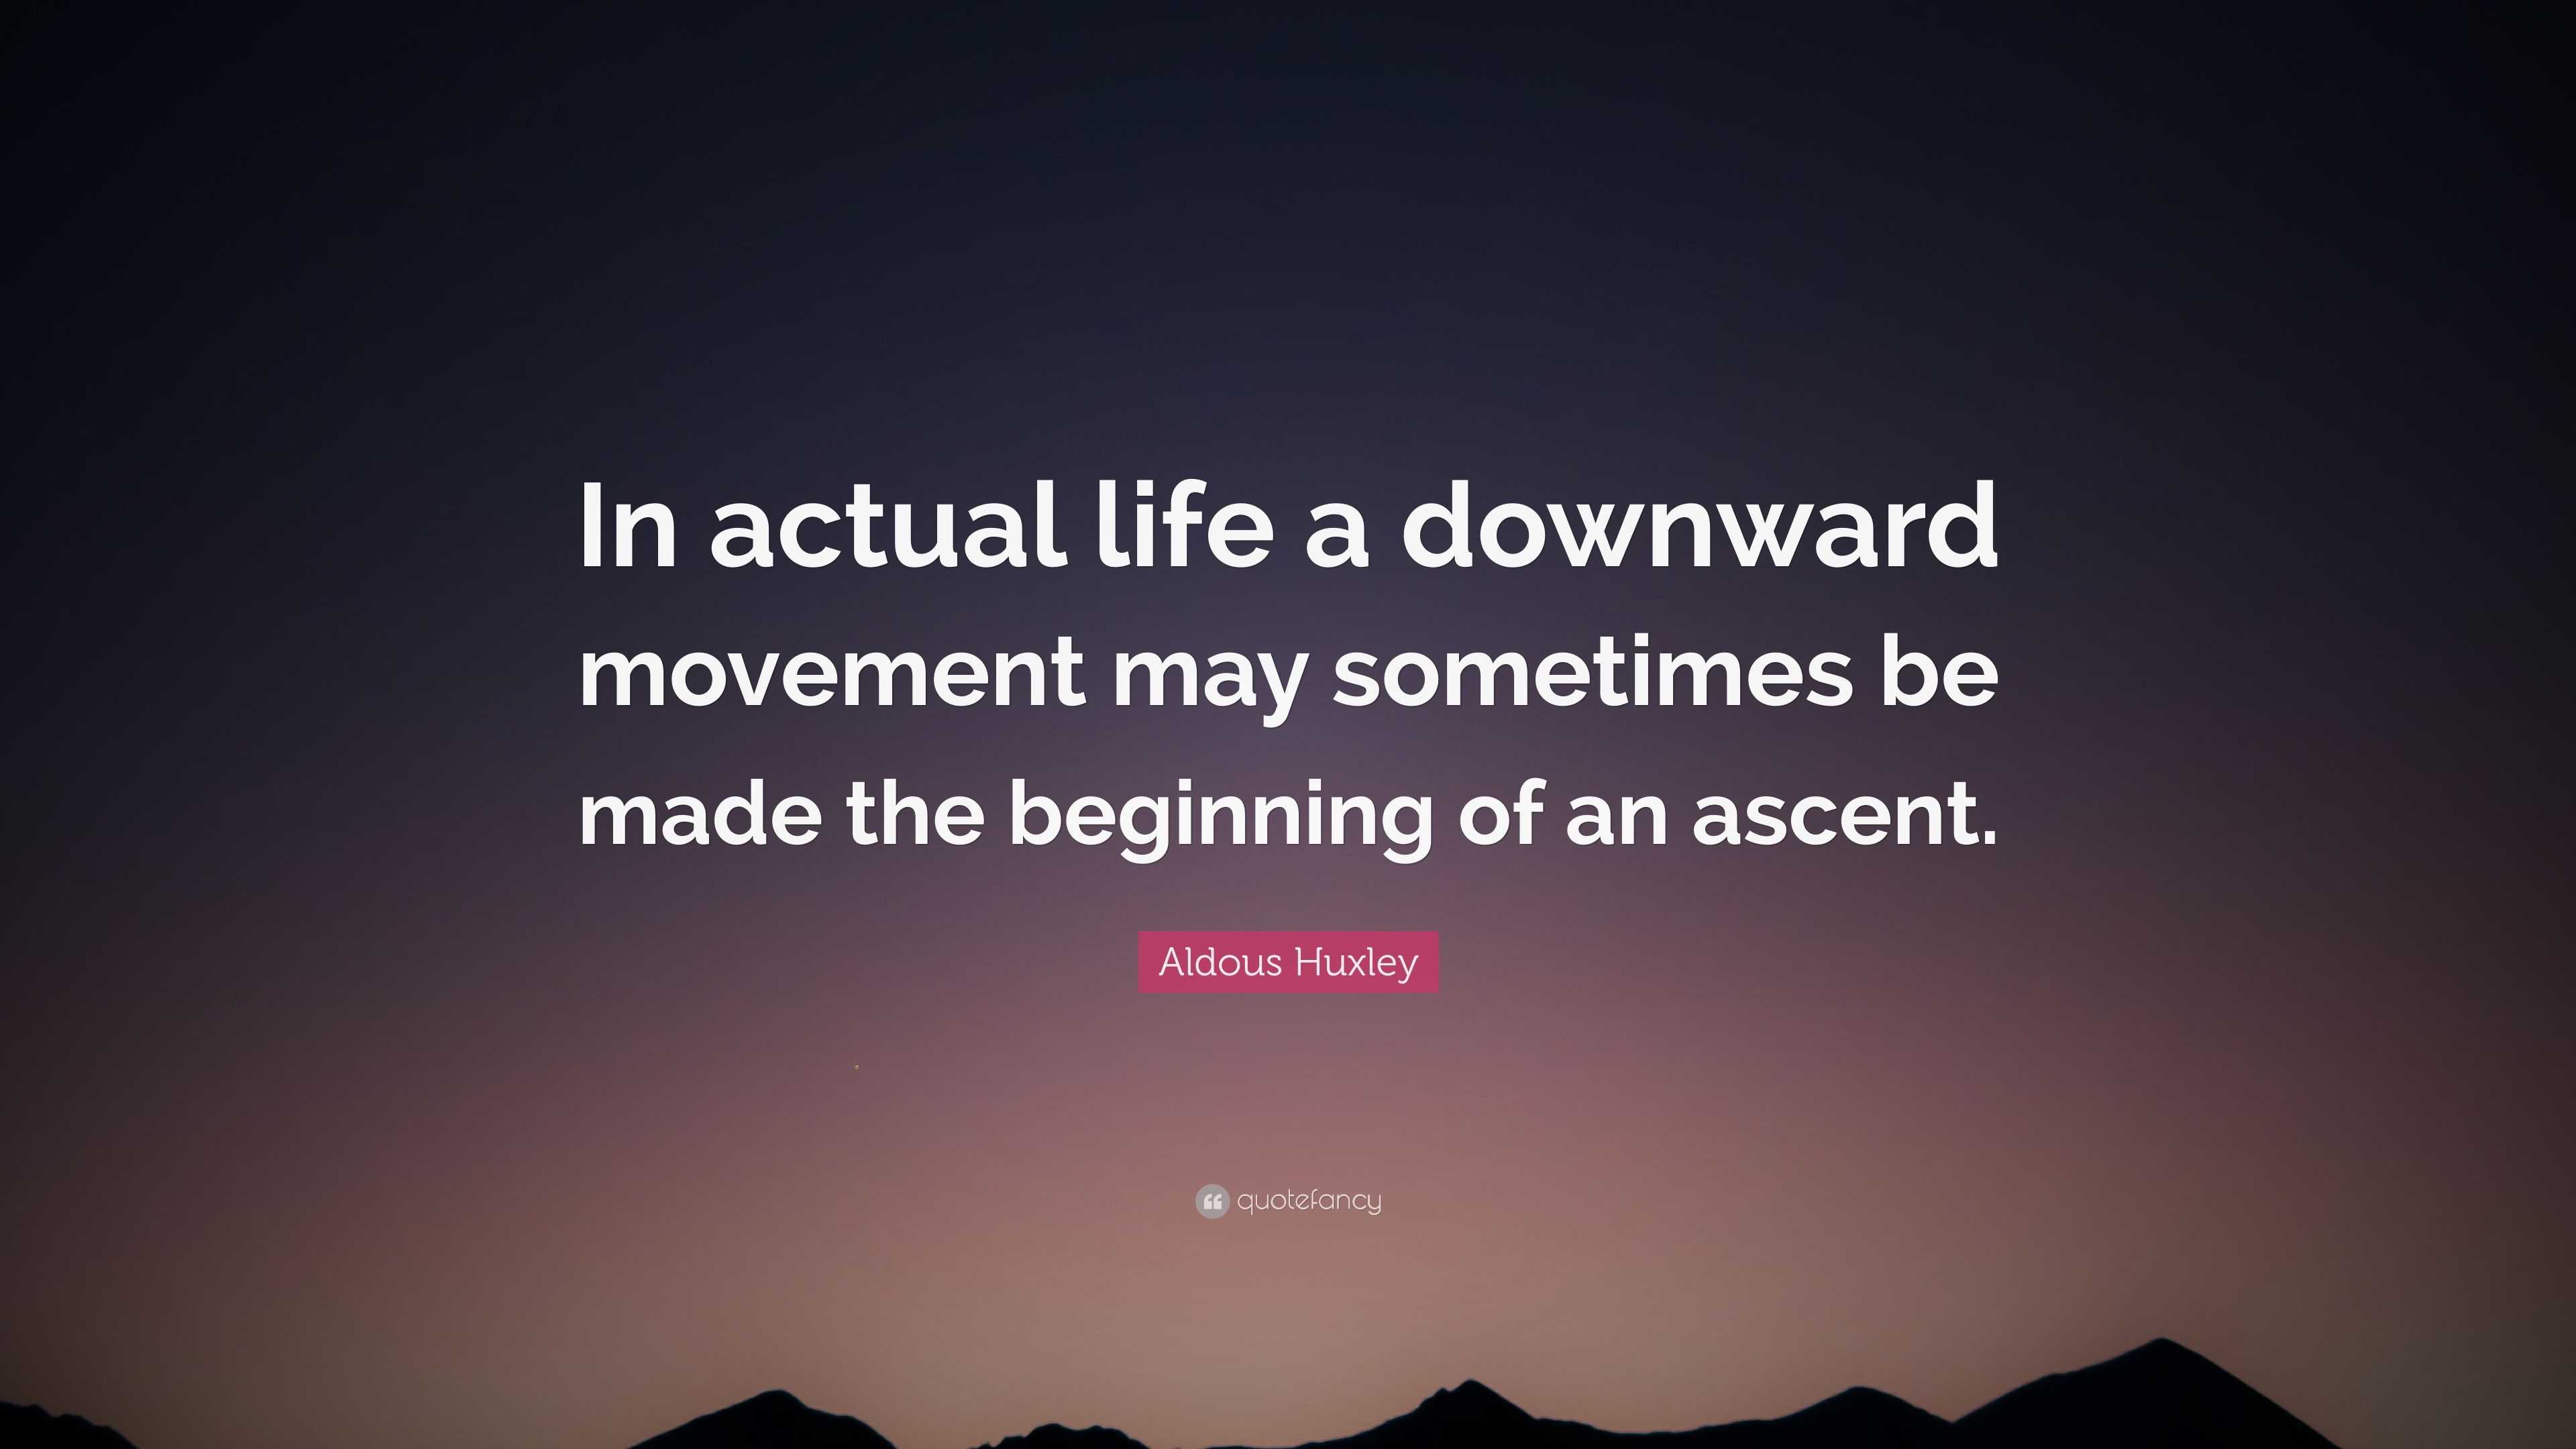 Aldous Huxley Quote “in Actual Life A Downward Movement May Sometimes